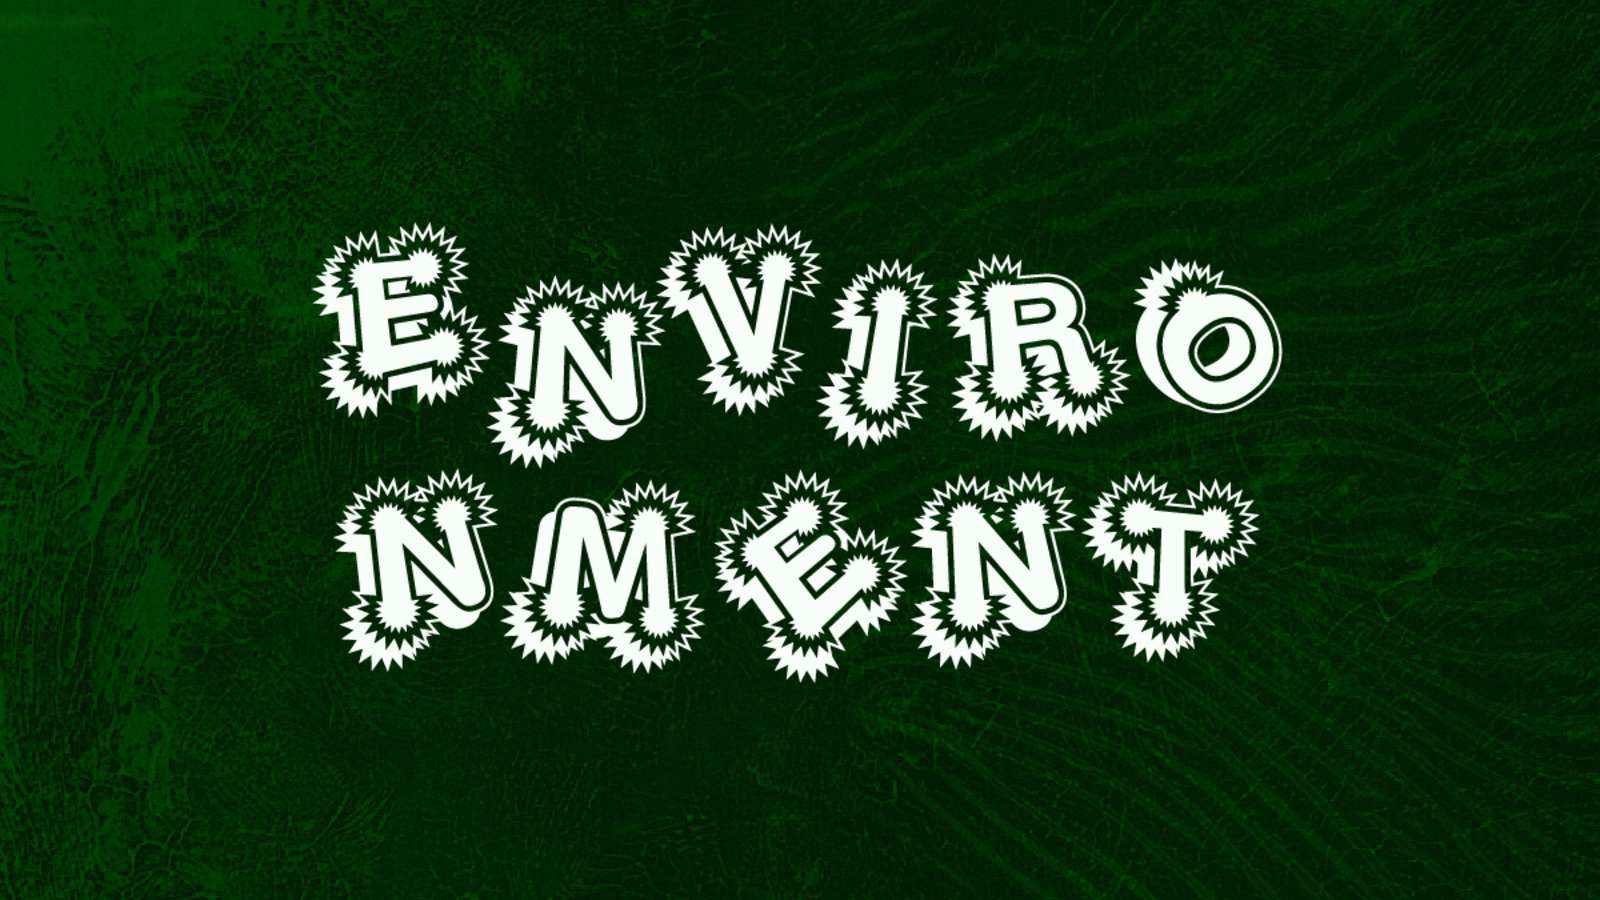 Graphic reads: ENVIRONMENT